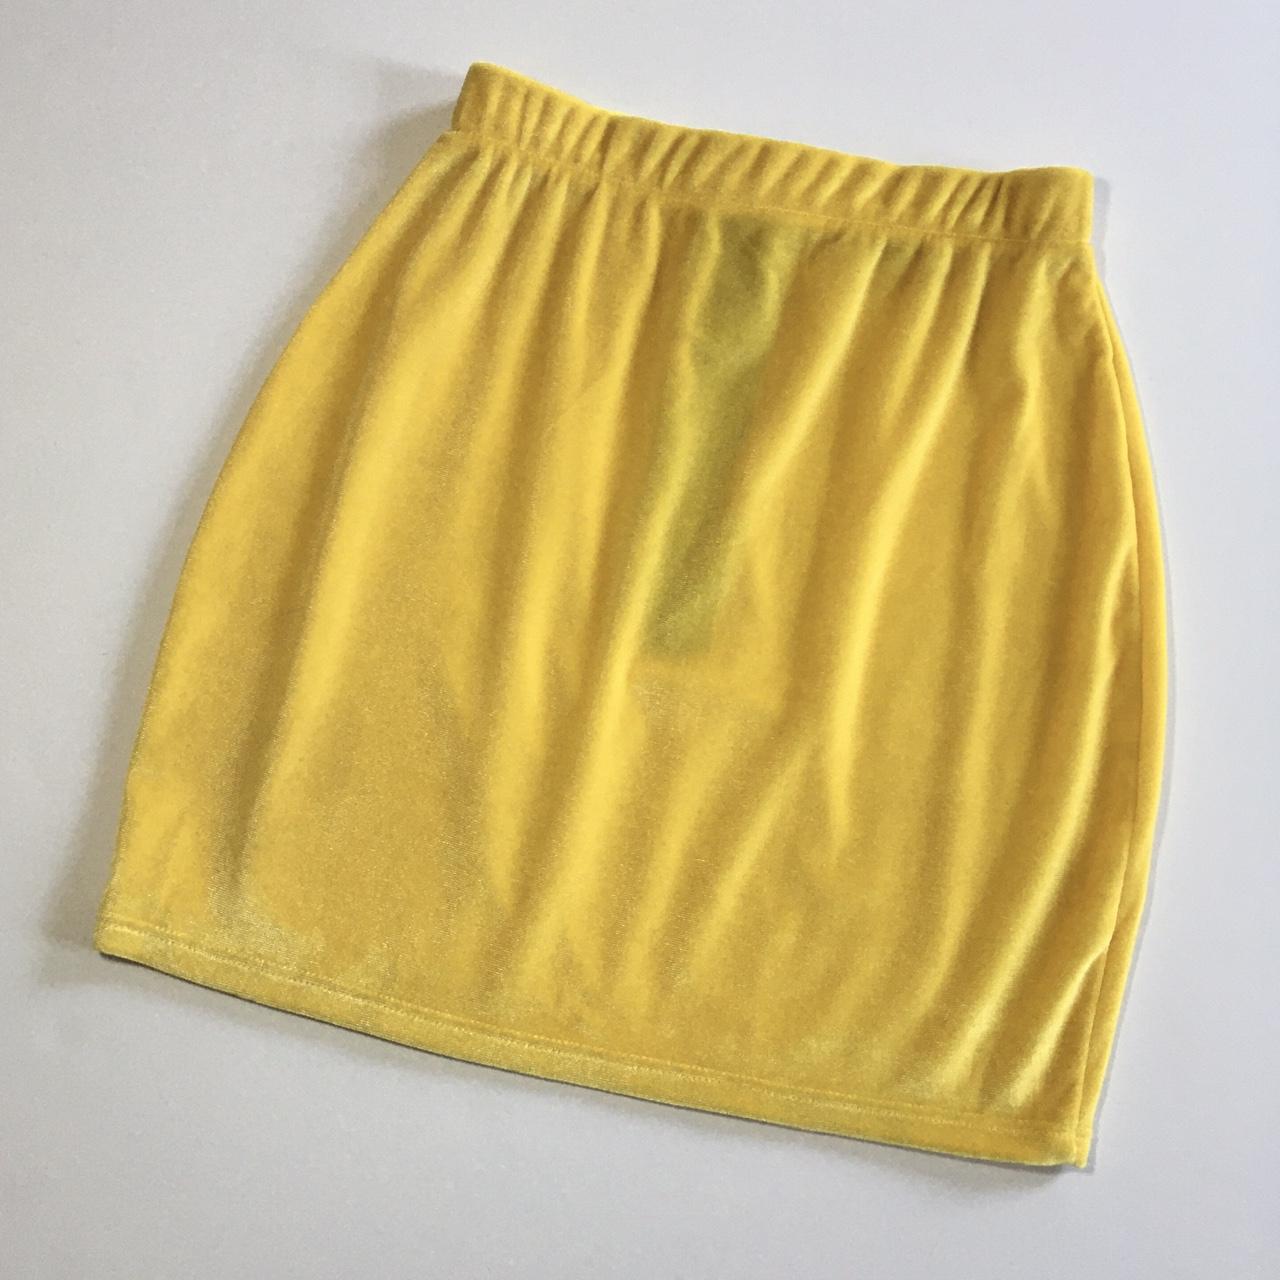 Urban Outfitters Women's Yellow Skirt